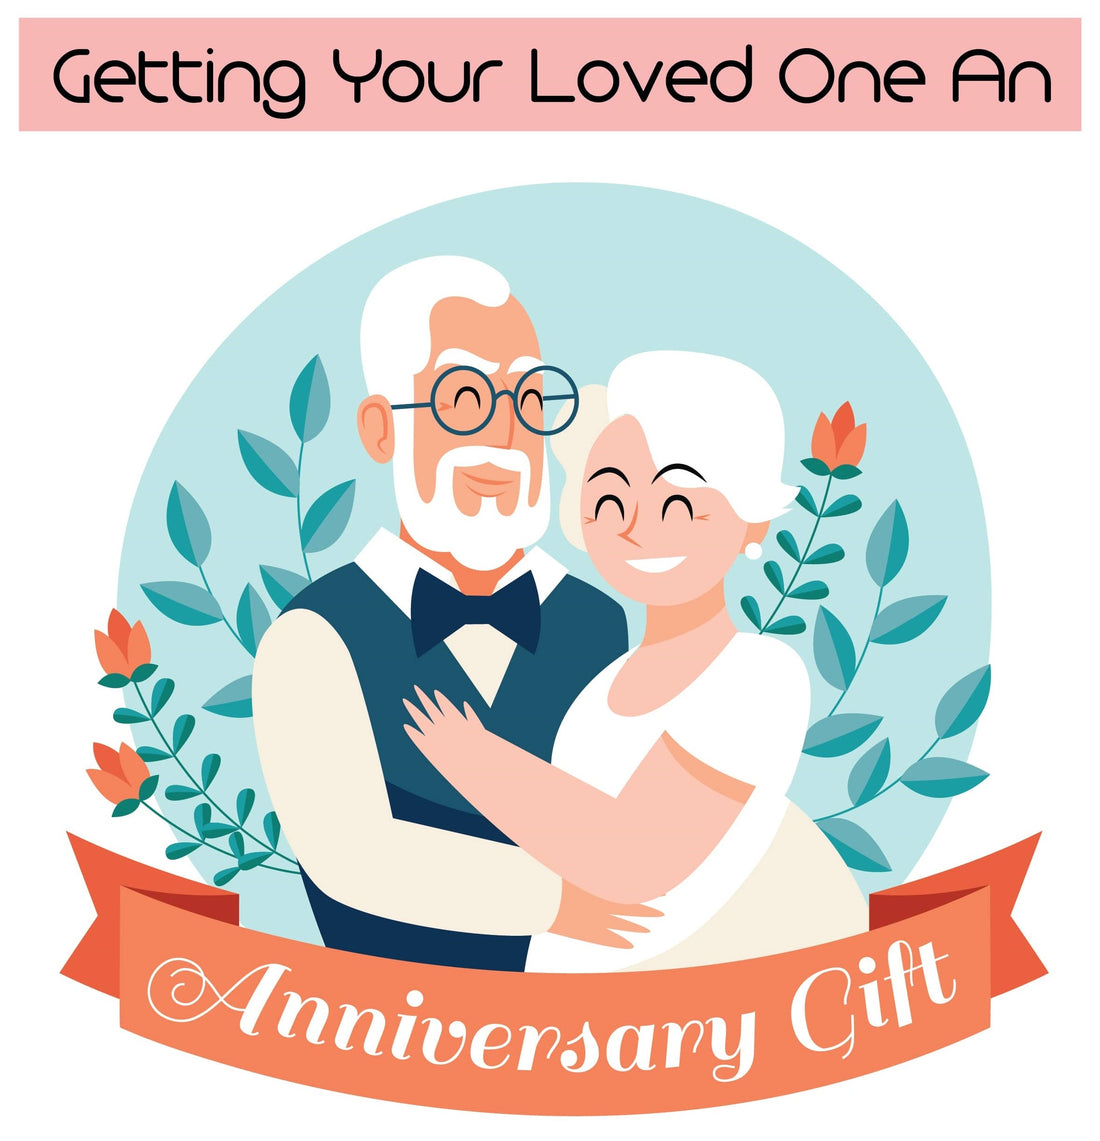 Getting Your Loved One An Anniversary Gift - AmourPrints